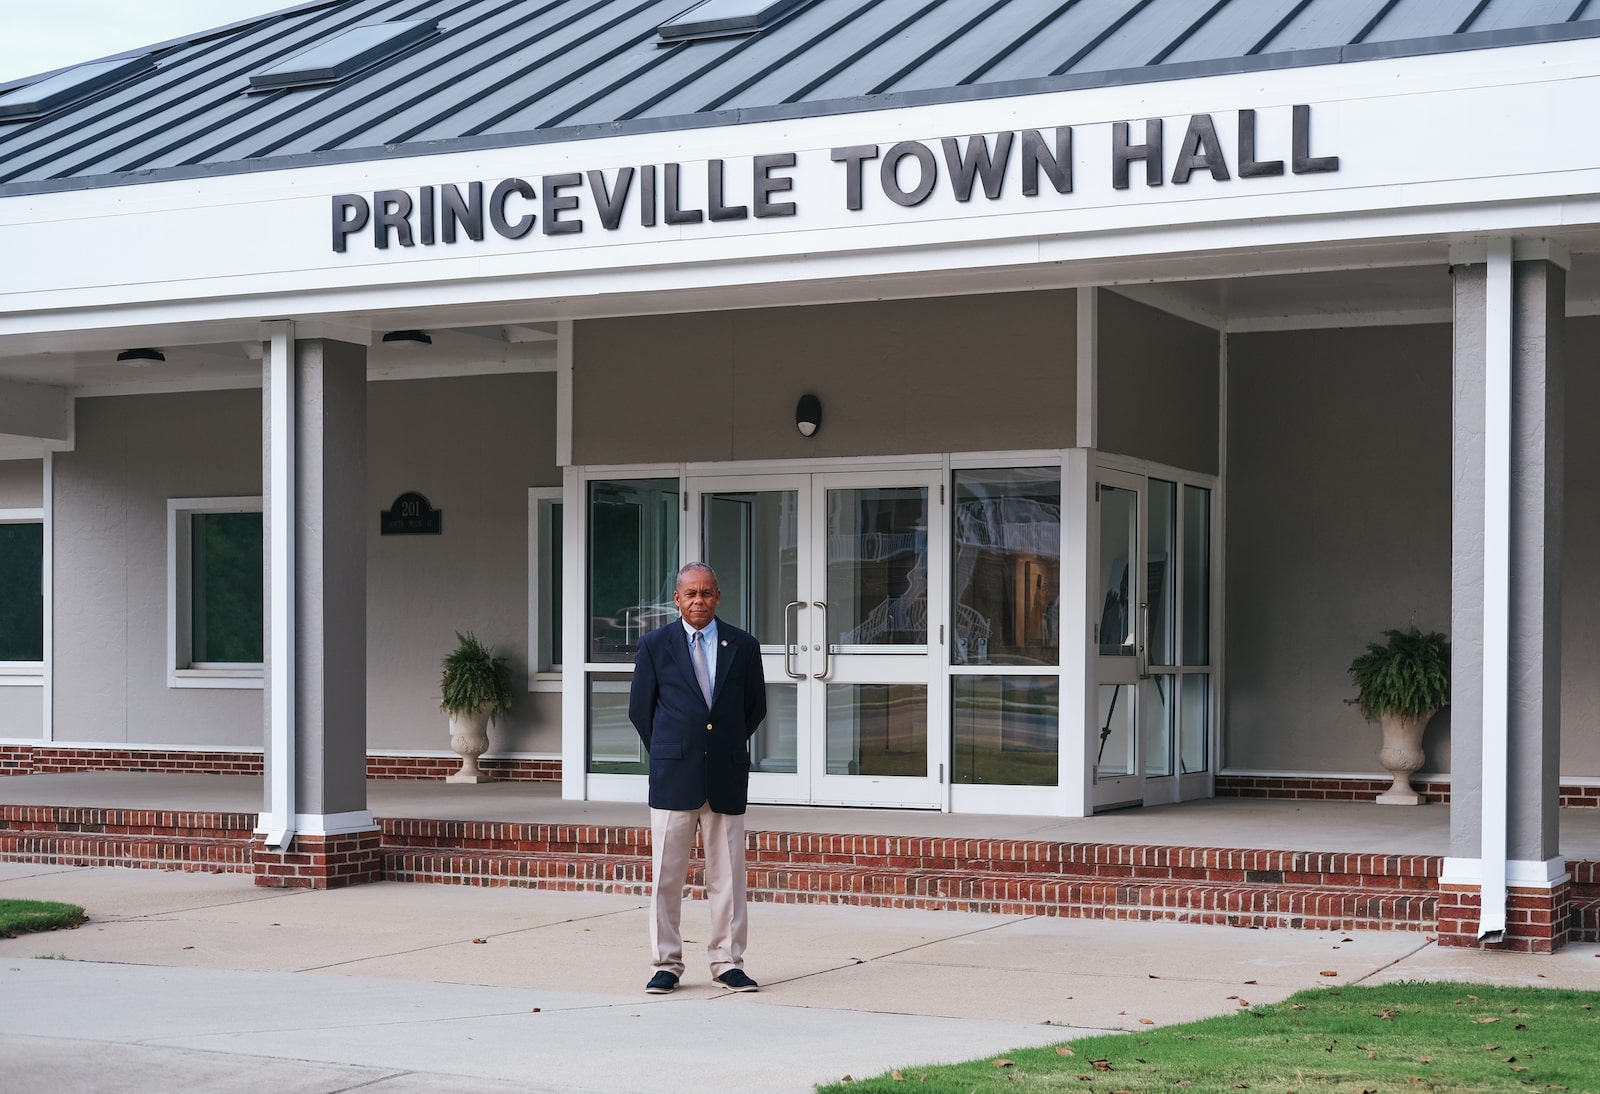 a man in a suit stands in front of a white building with the words Princeville Town Hall marked on it